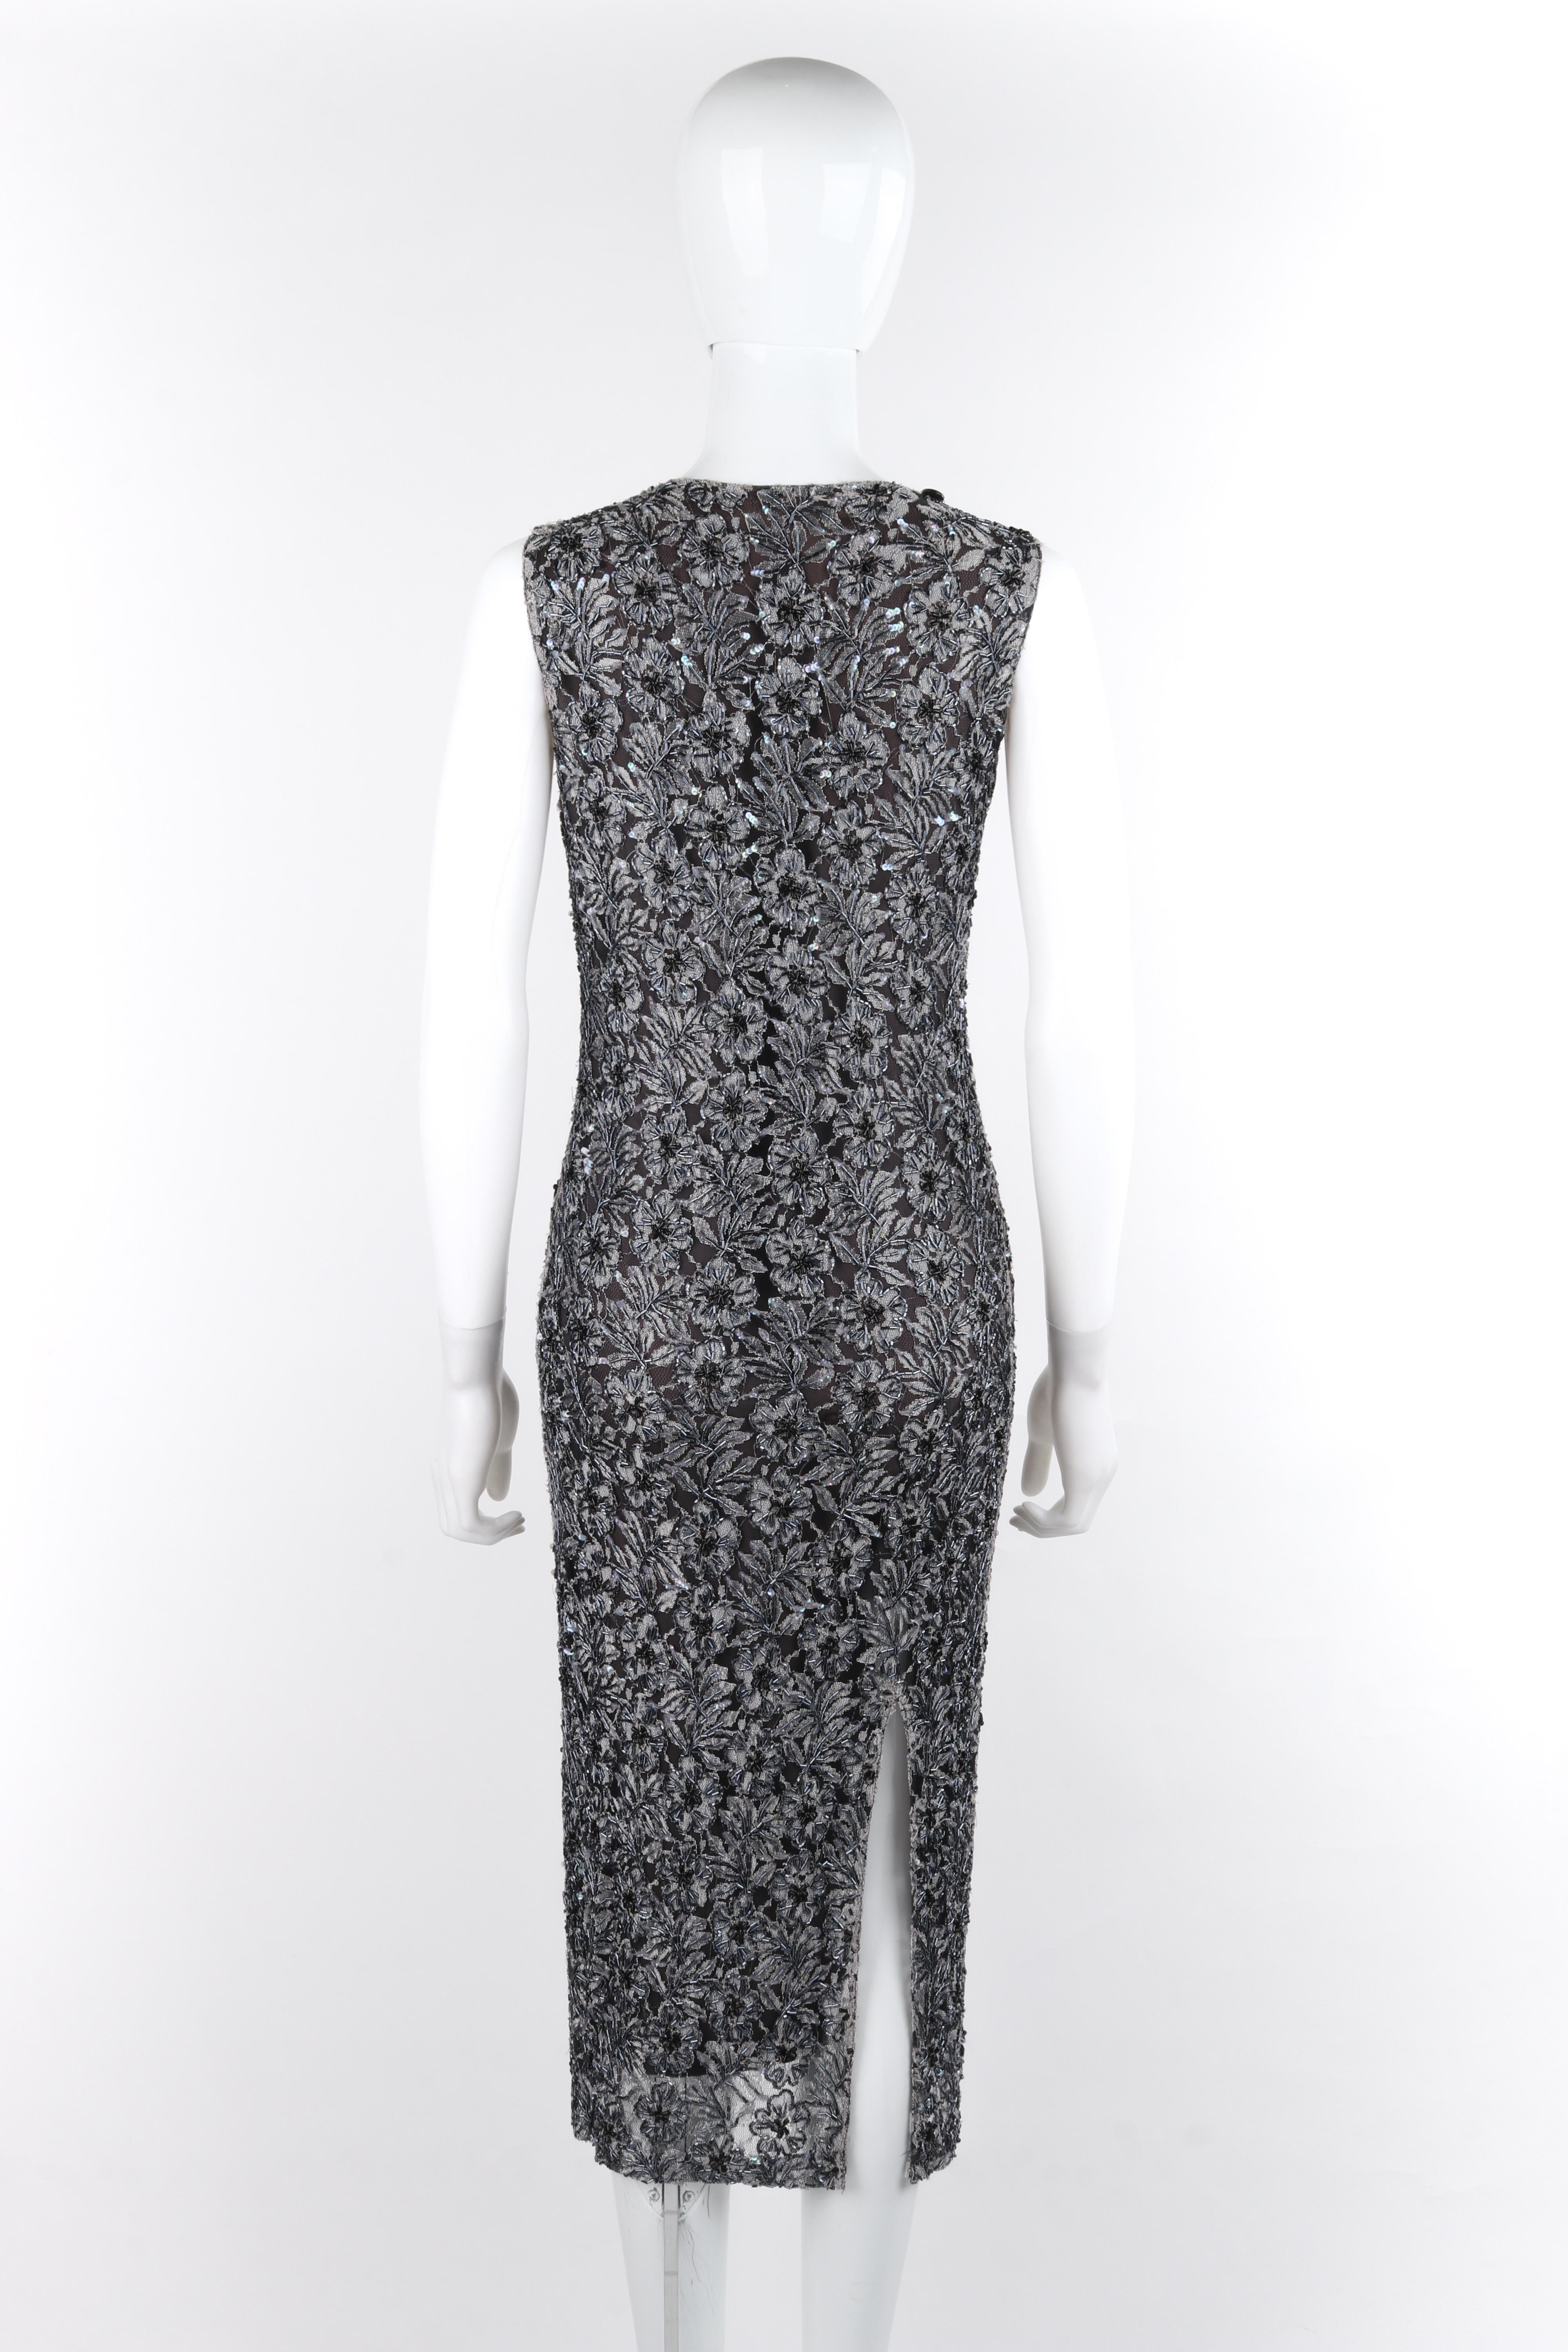 ALEXANDER McQUEEN c.1999 Vtg Grey Sequin Beaded Lace Embellished Cutout Dress For Sale 2